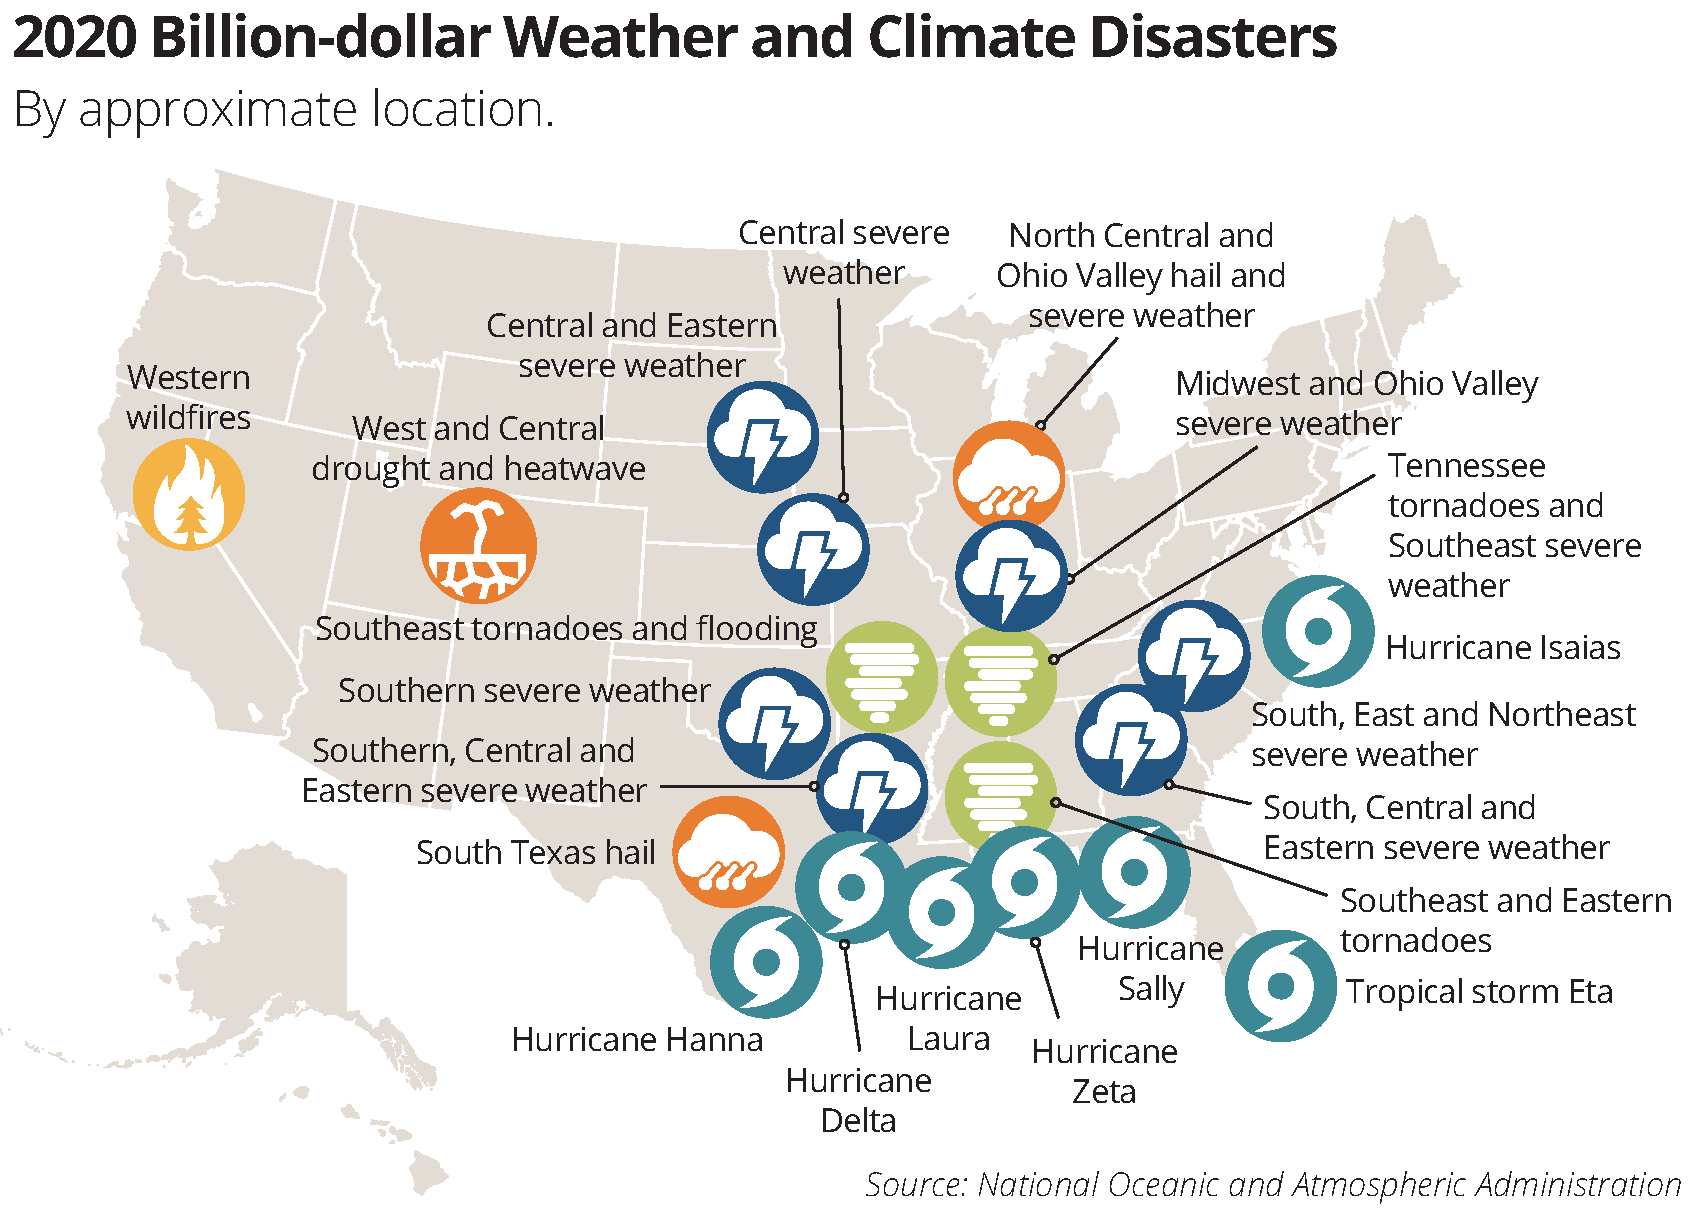 United States map showing locations of weather and climate disasters throughout 2020